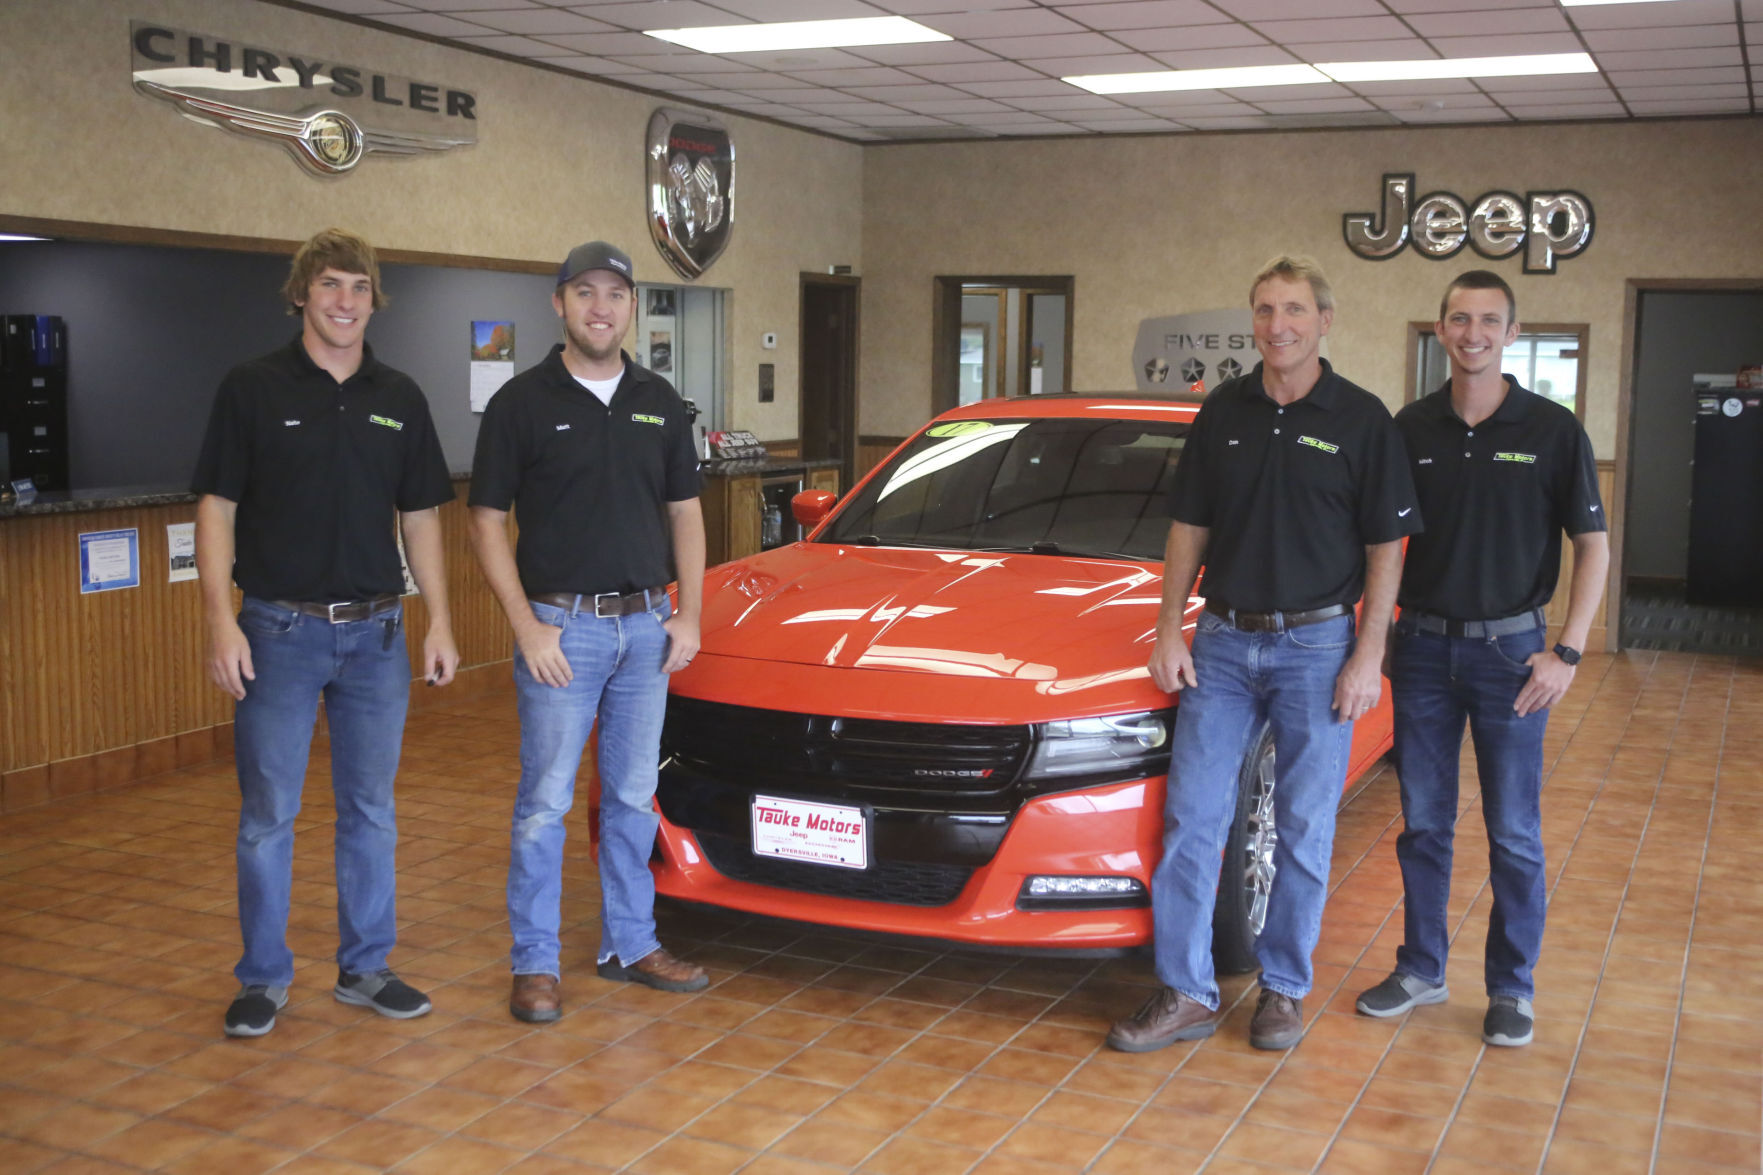 Nate (from left), Matt, Dan and Mitch Tauke enjoy a moment together in the Tauke Motors showroom in Dyersville, Iowa.    PHOTO CREDIT: Don Zieser, Dyersville Commercial